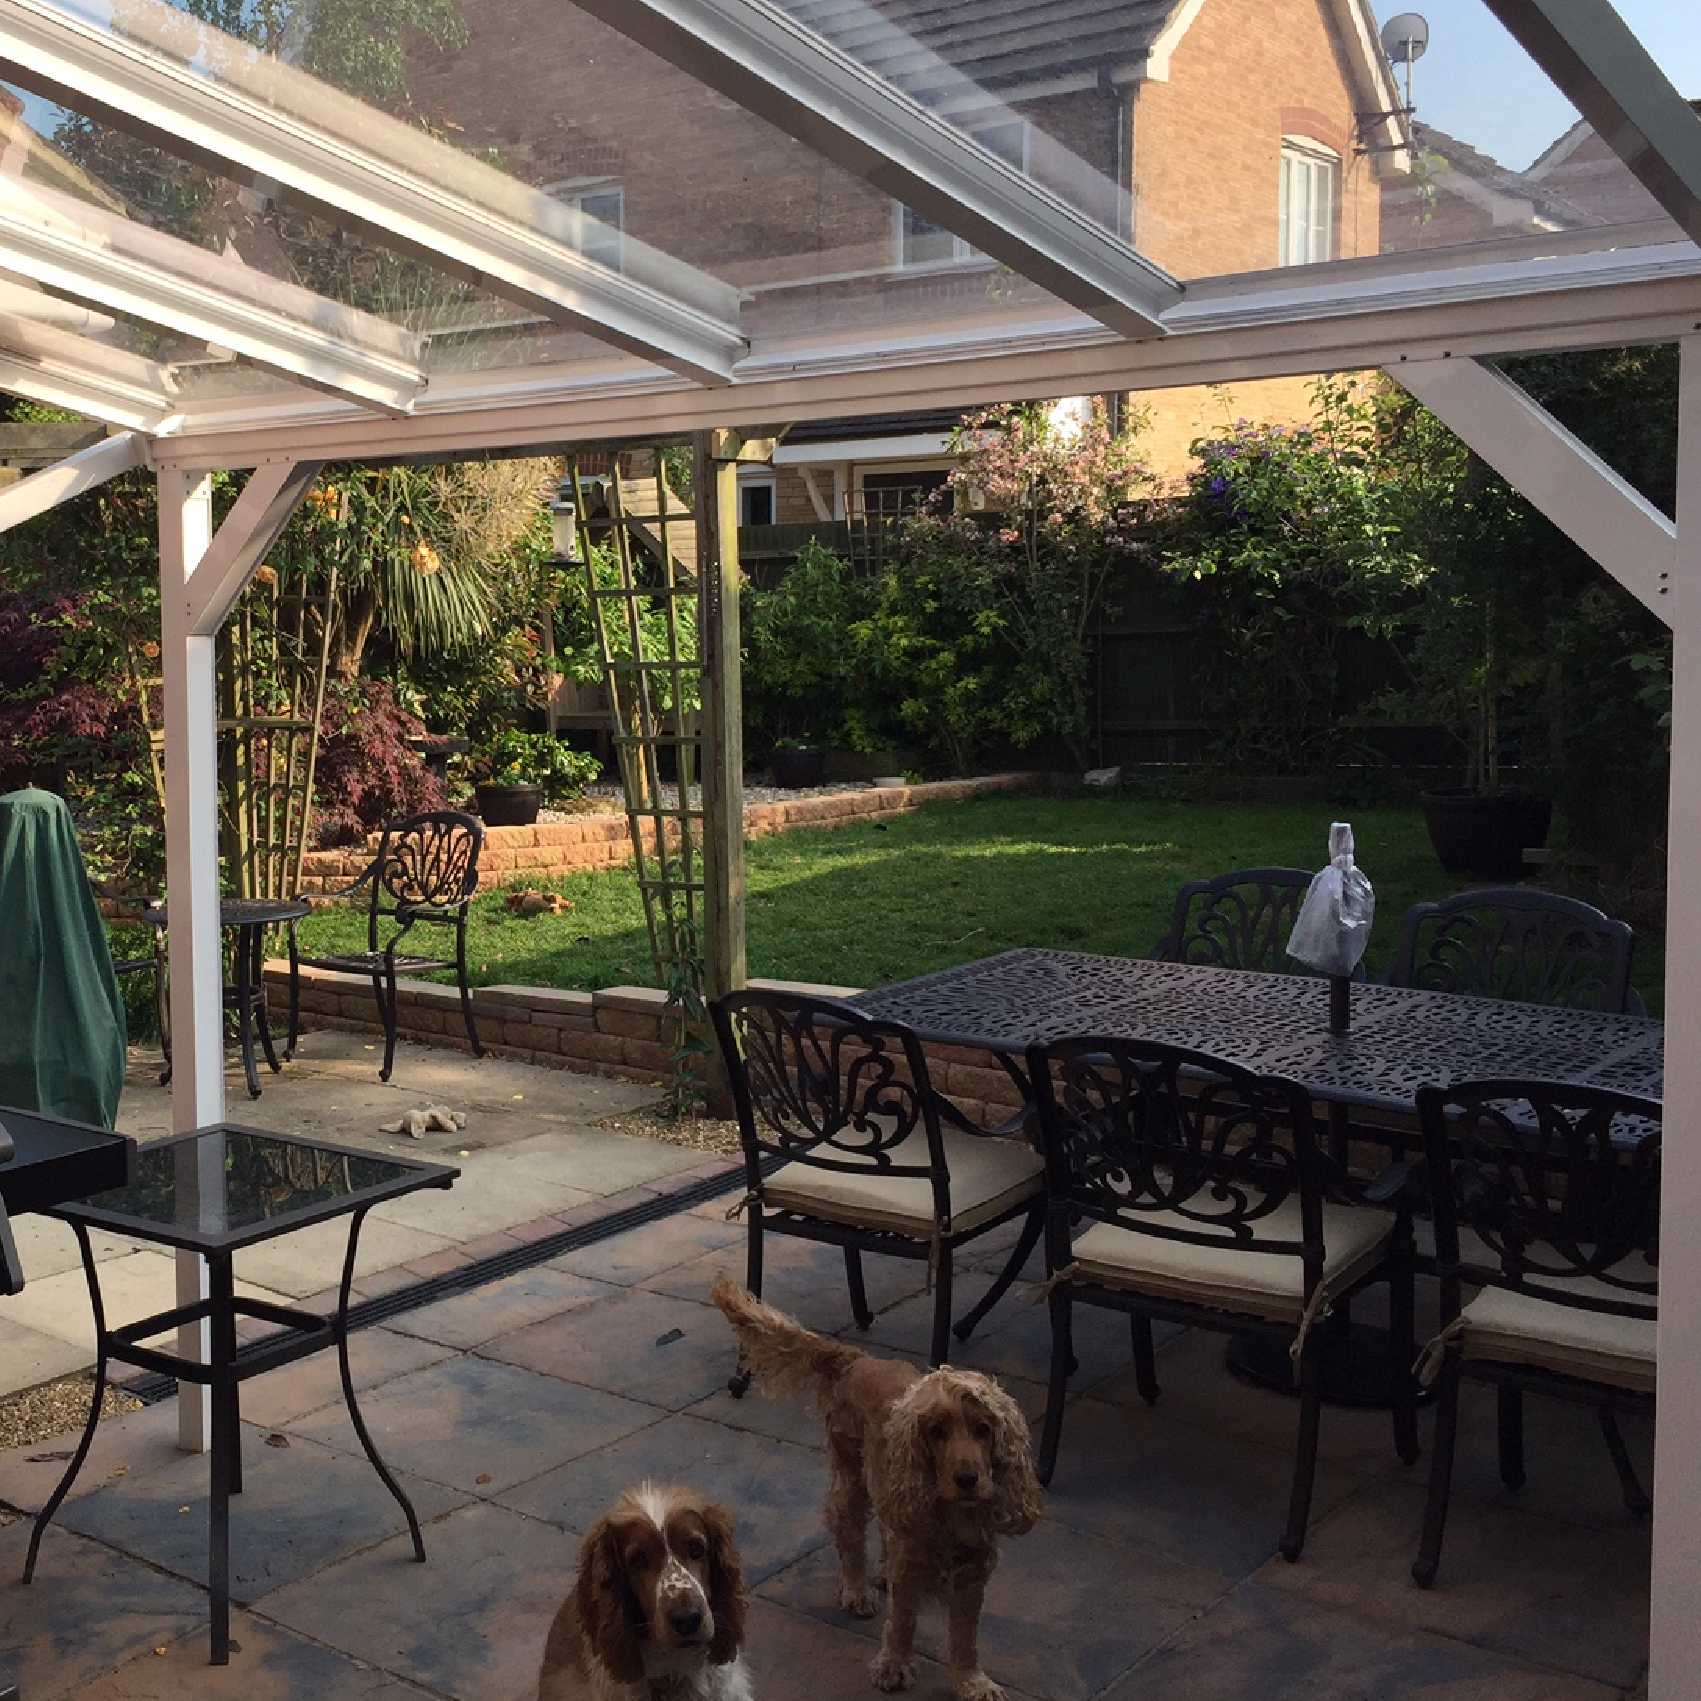 Affordable Omega Smart Lean-To Canopy, White UNGLAZED for 6mm Glazing - 6.3m (W) x 1.5m (P), (4) Supporting Posts